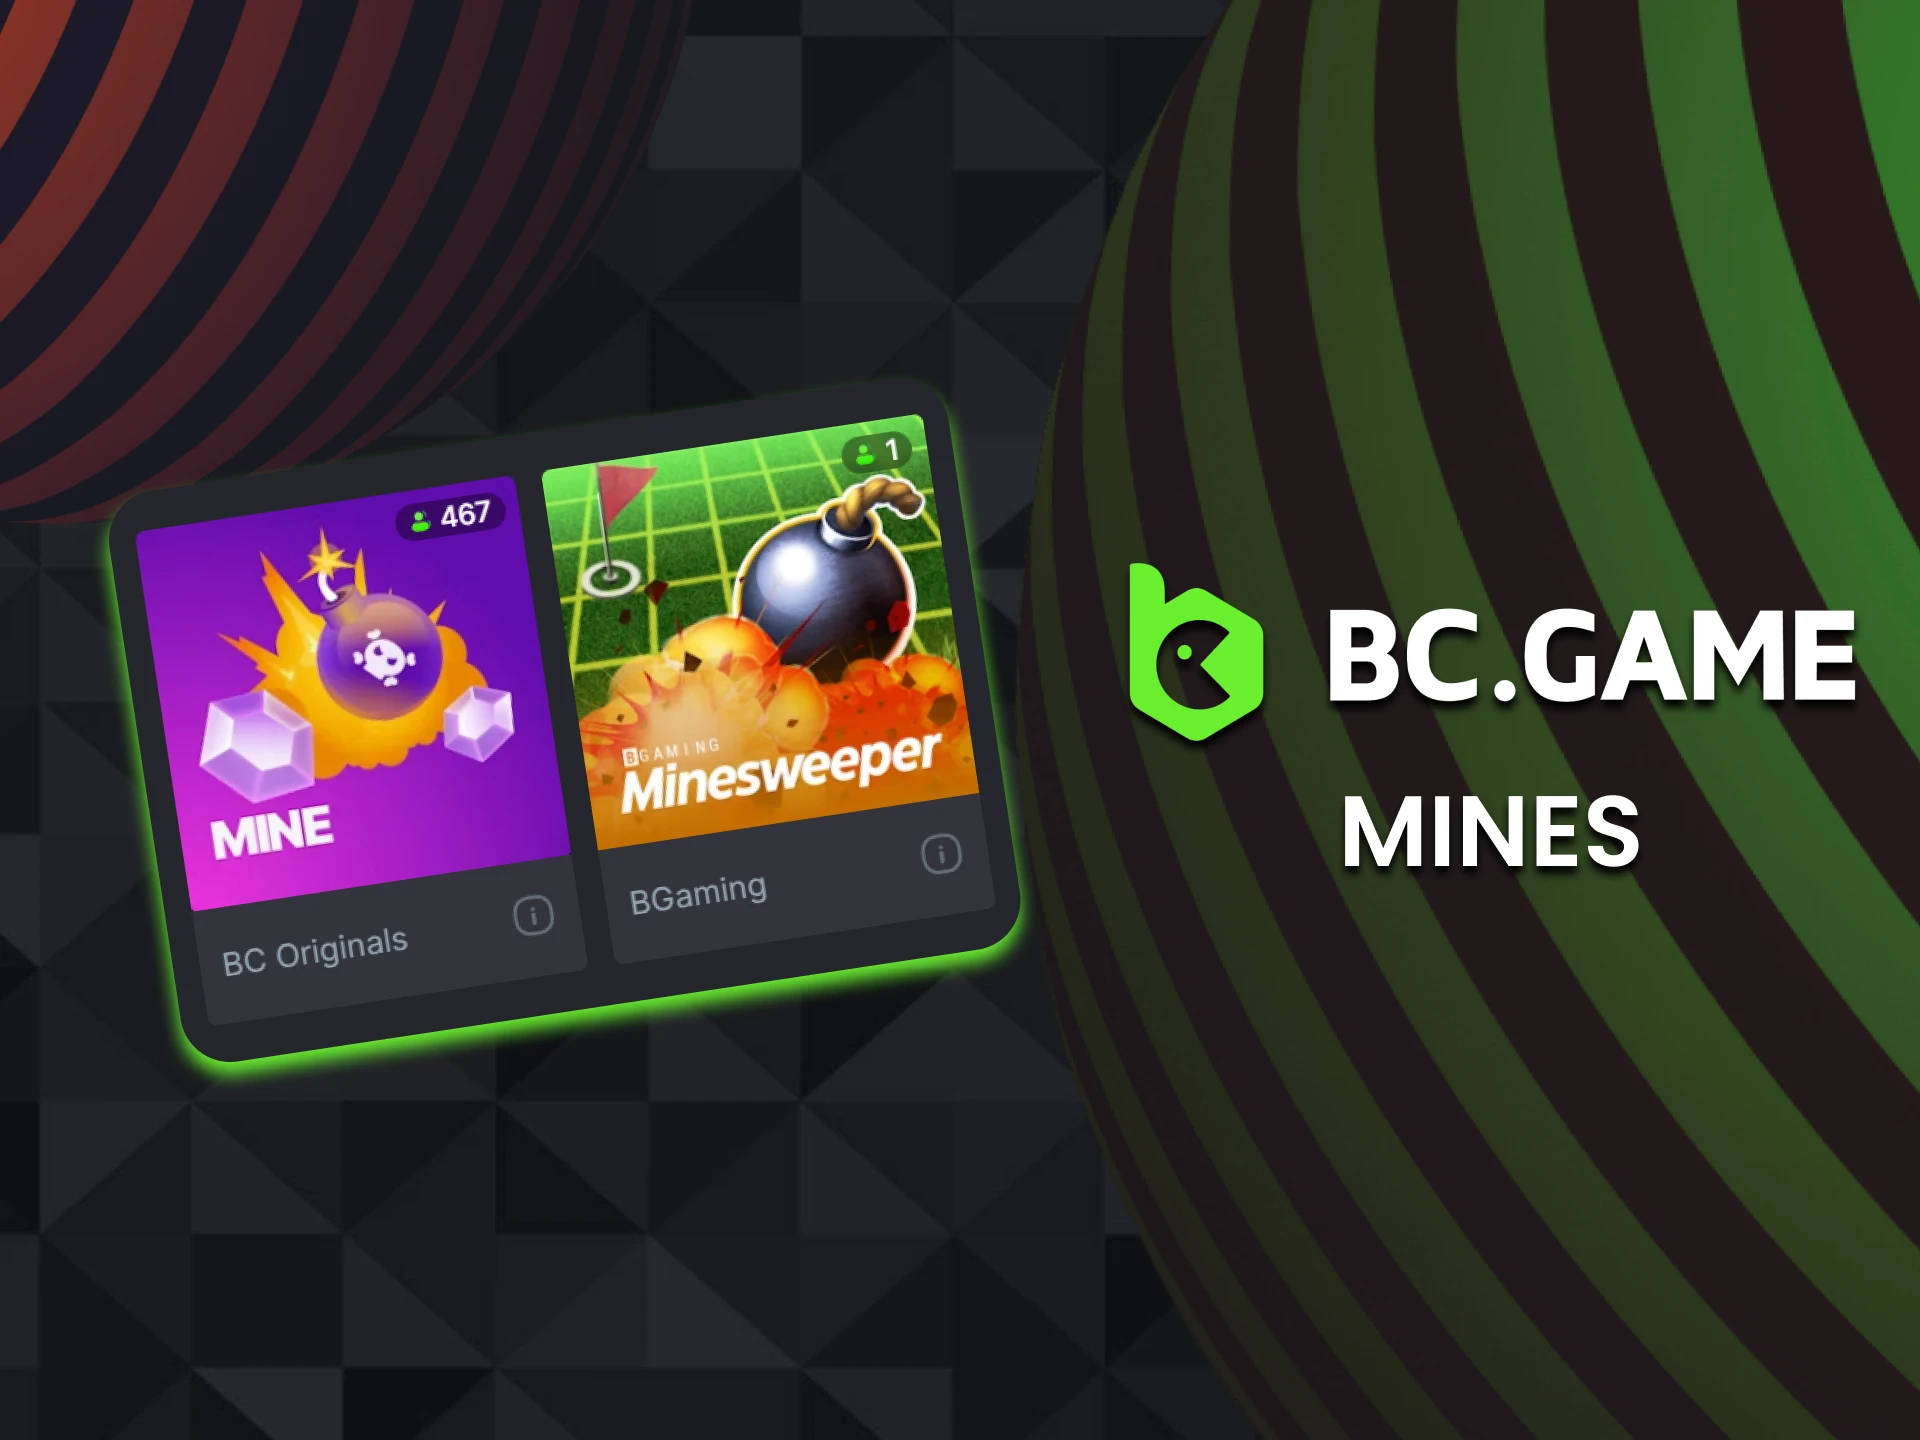 In the BC Game casino section you can find MInes games.